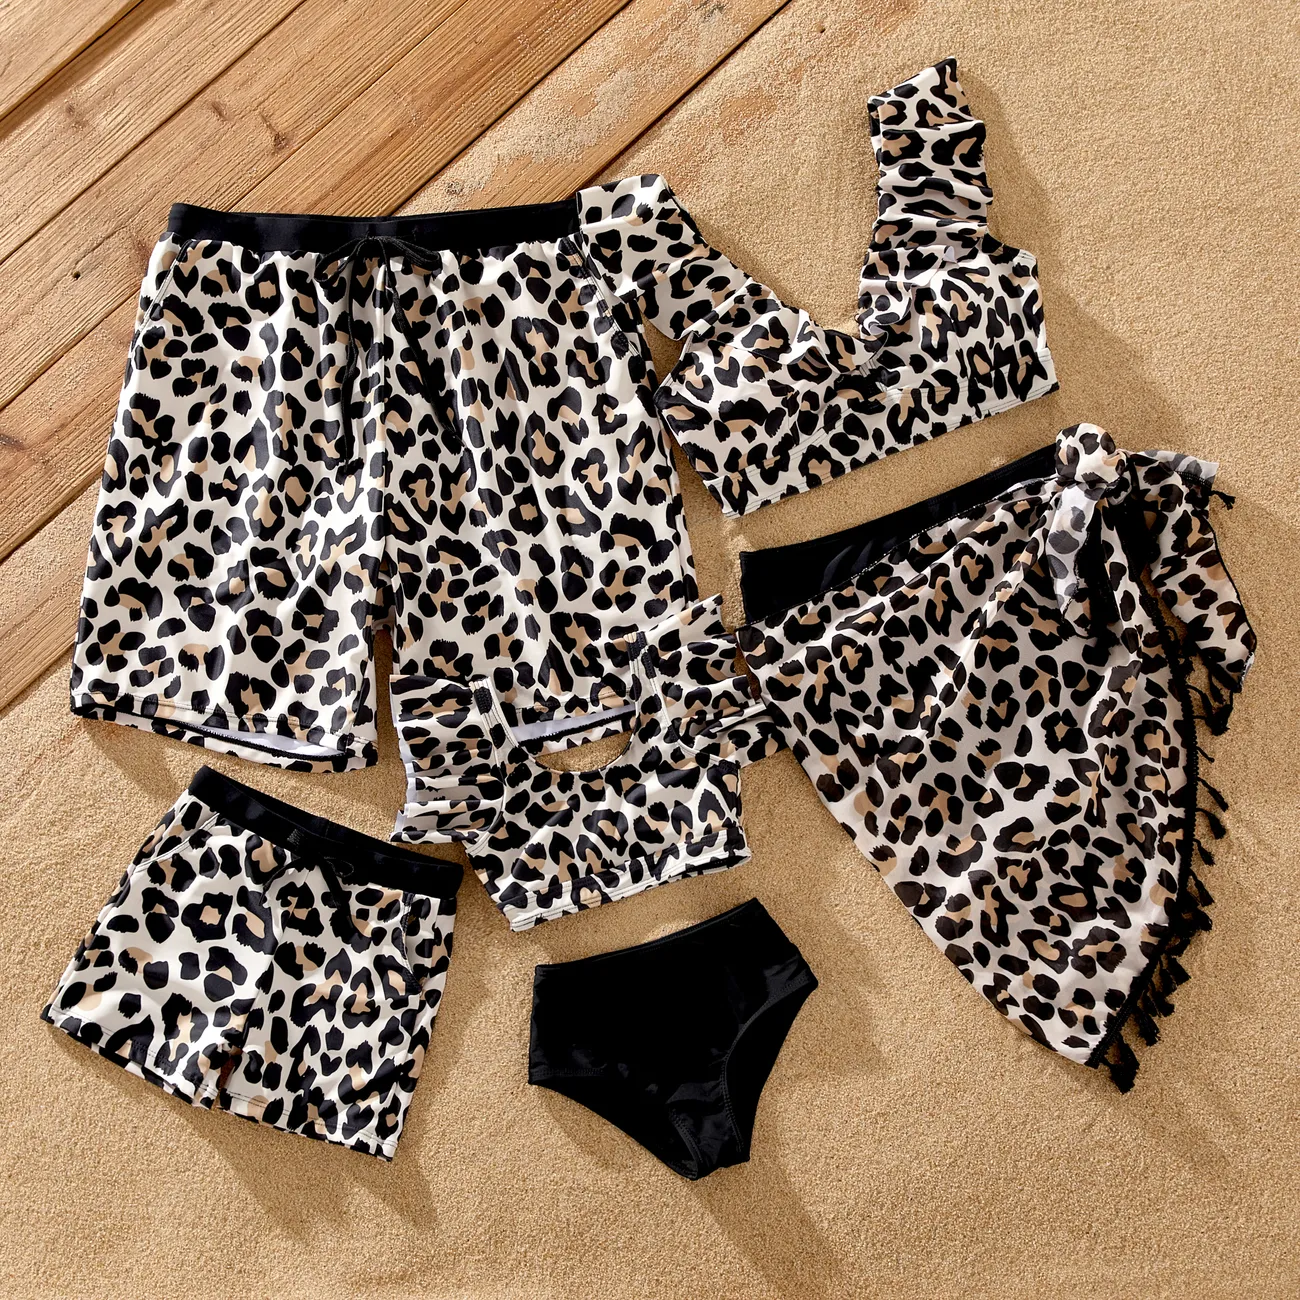 Family Matching Leopard Pattern Drawstring Swim Trunks or Ruffle Neck Two-Piece Bikini with Optional Cover Up Sarong Skirt  Black big image 1